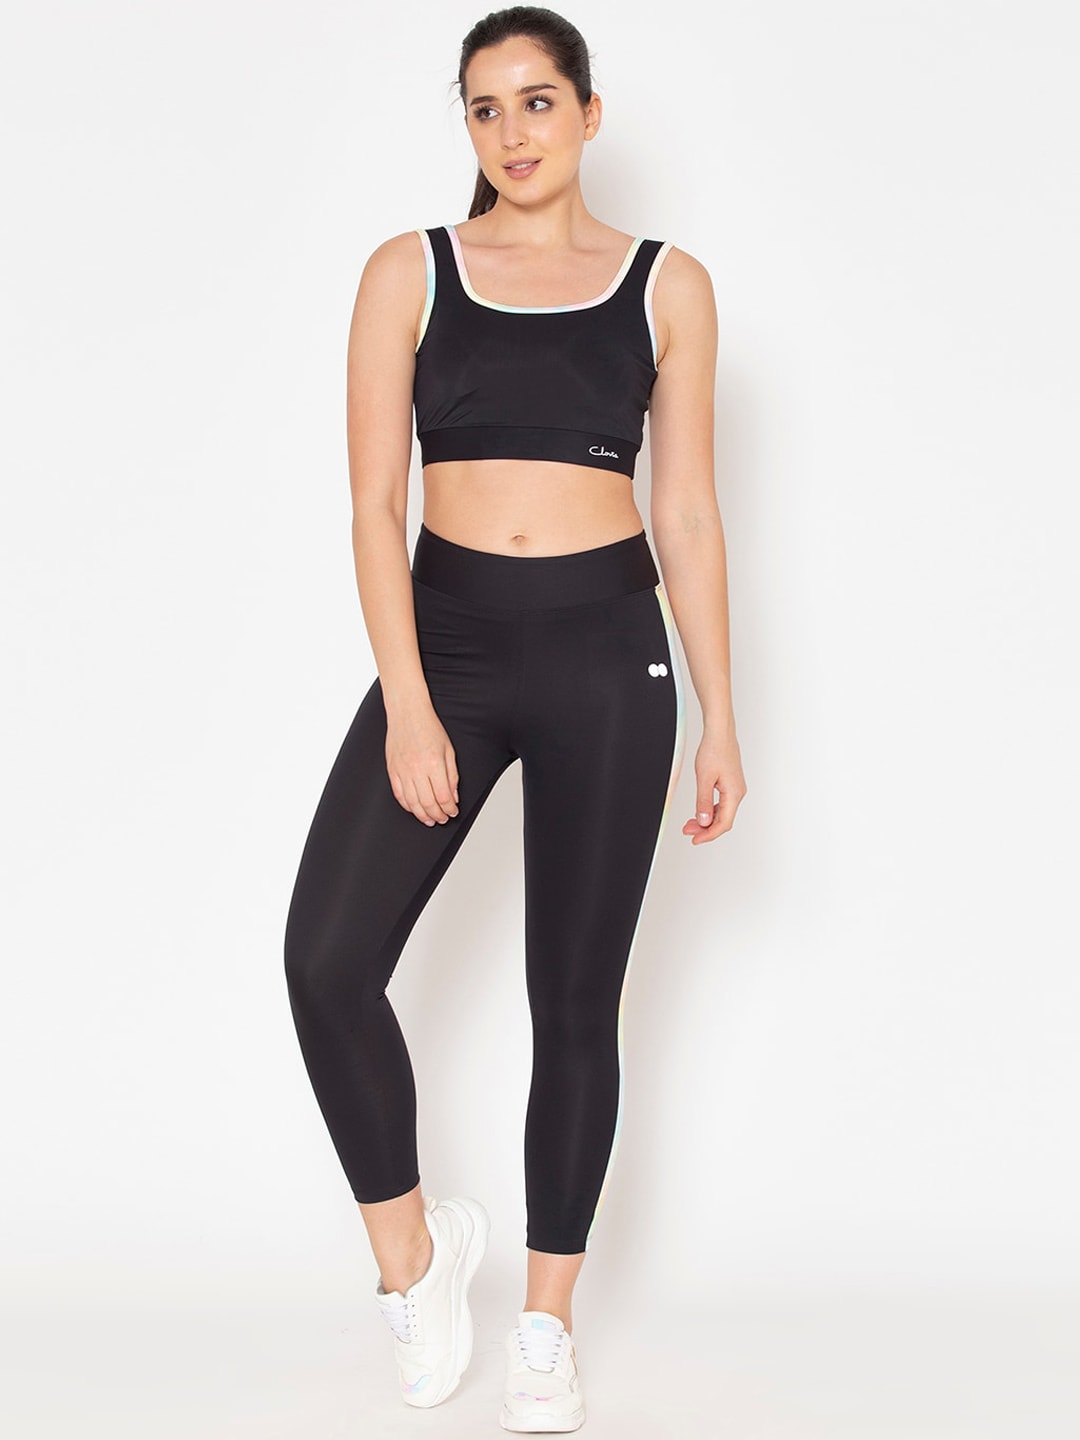 Clovia Women Black Solid Non-Wired Sports Bra with Tights Set Price in India